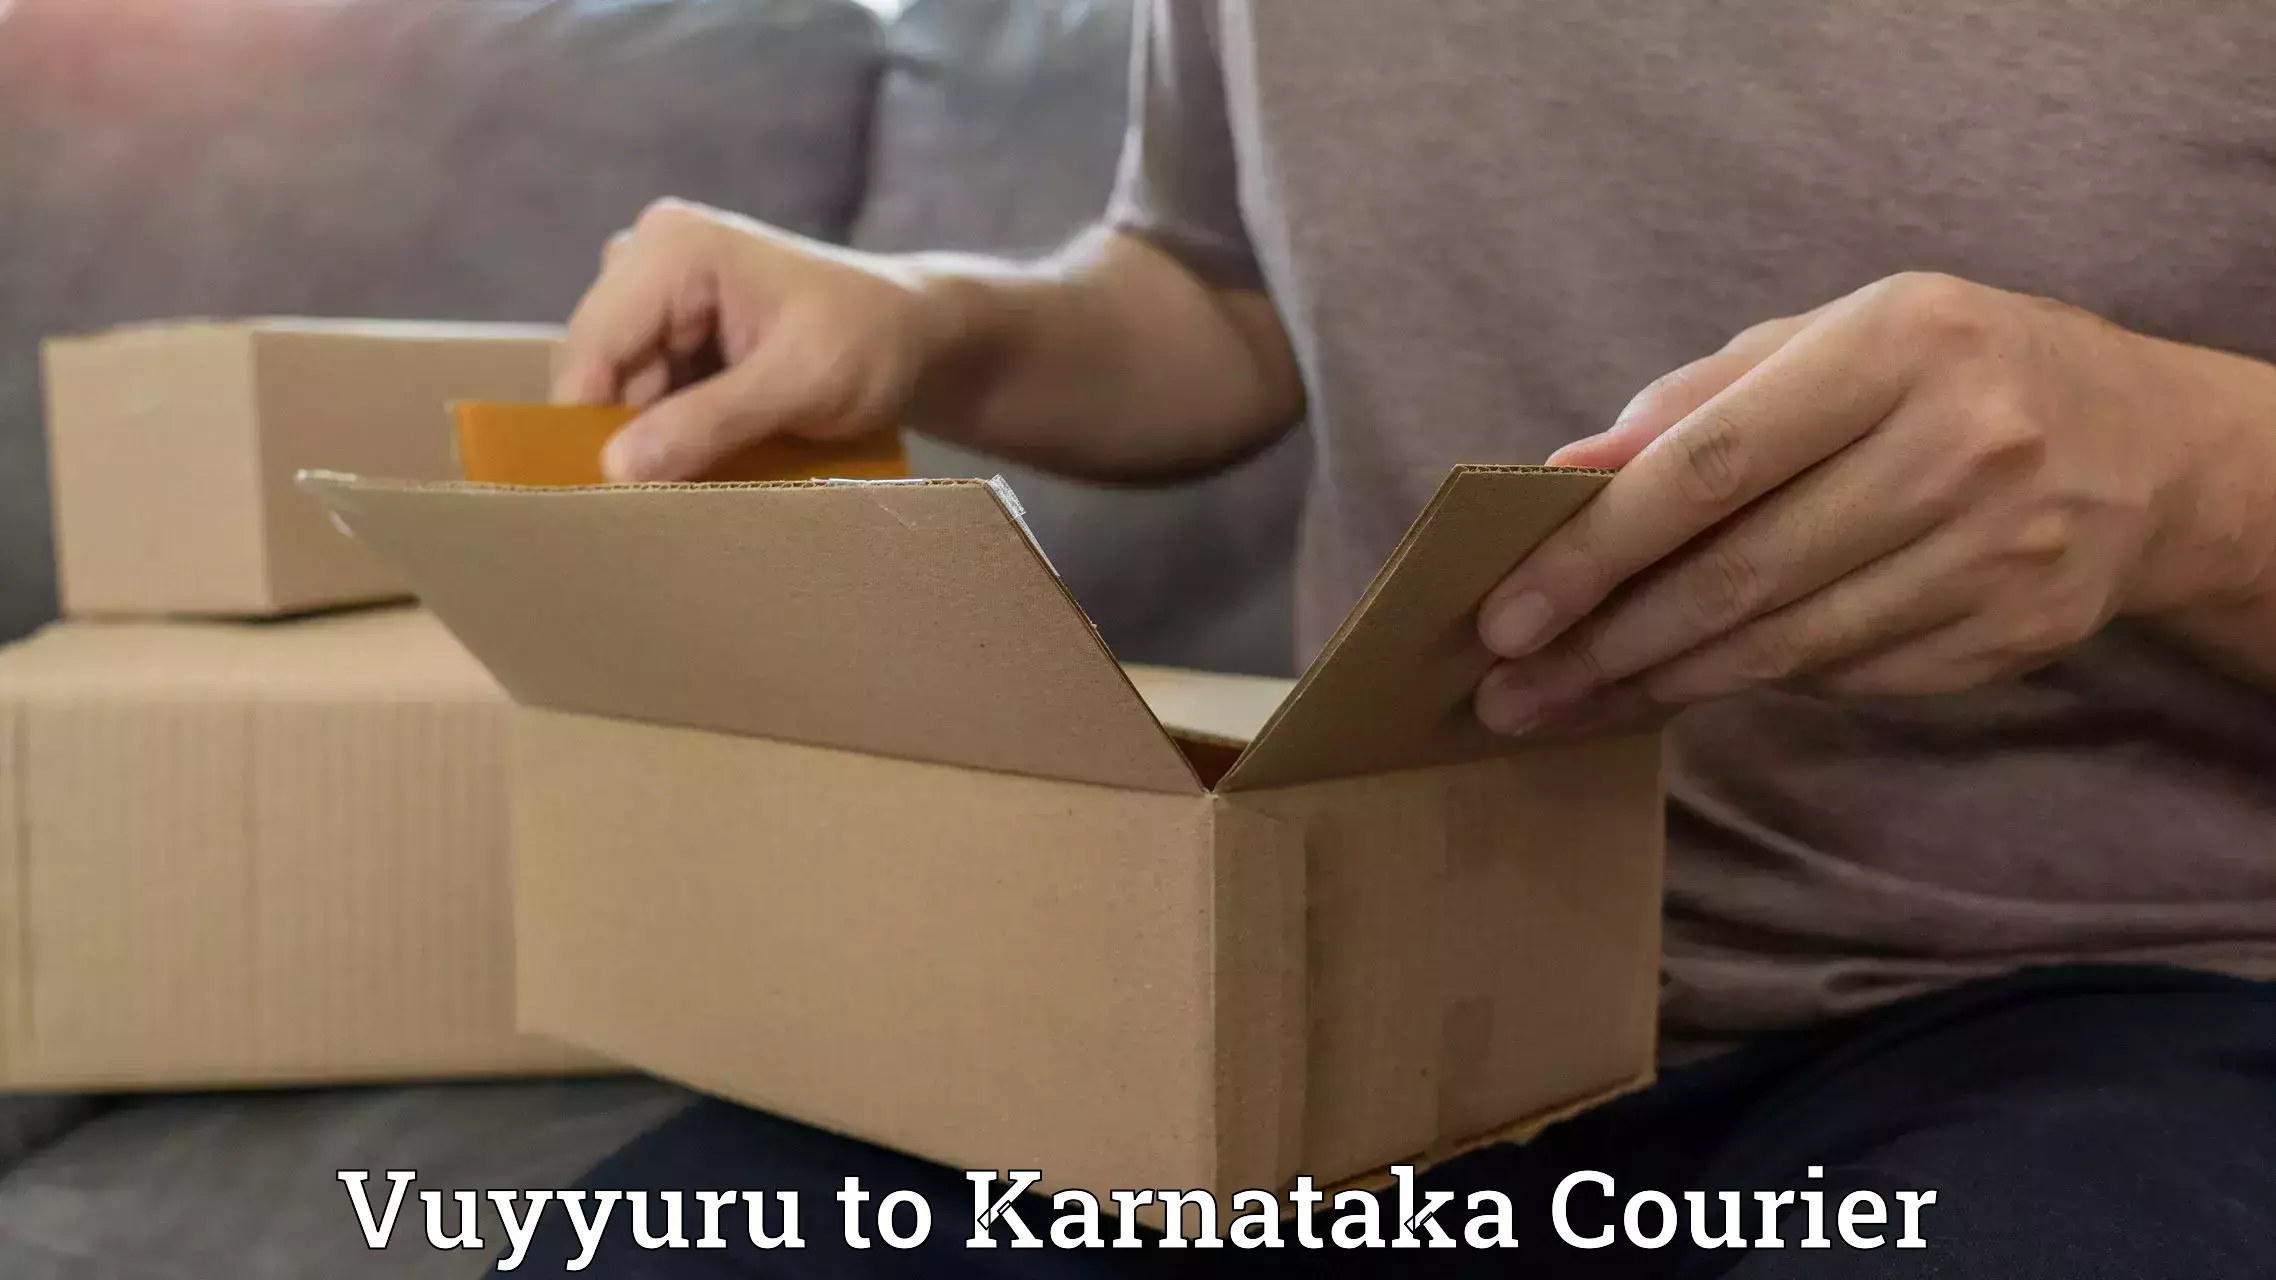 Reliable courier service in Vuyyuru to Tumkur